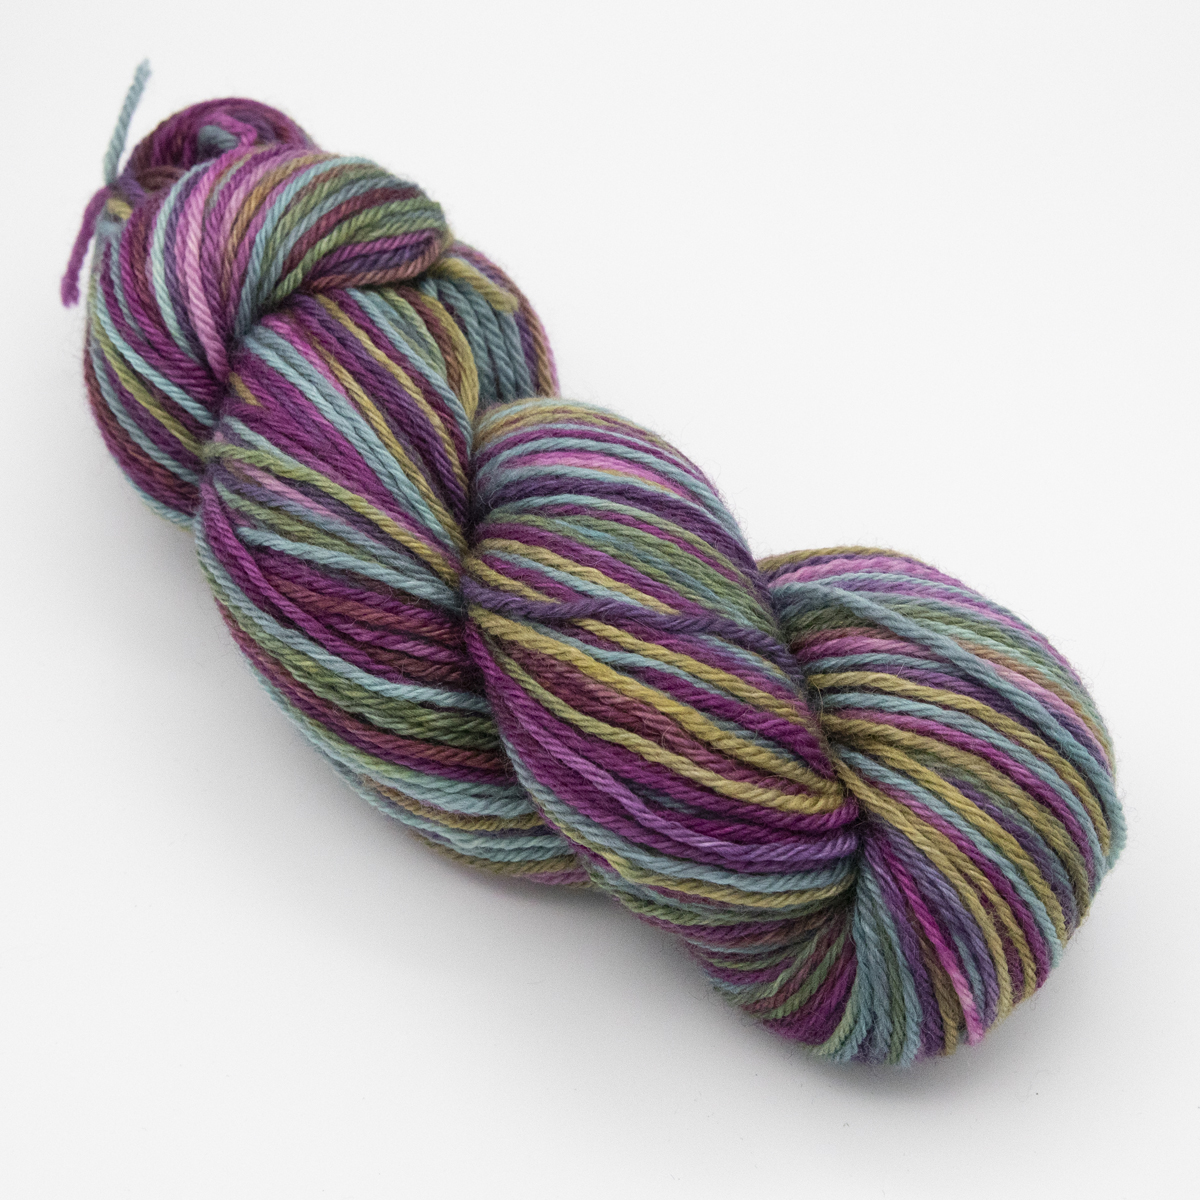 Shadier Rainbow hand dyed skeins of DK Blue Faced Leicester wool